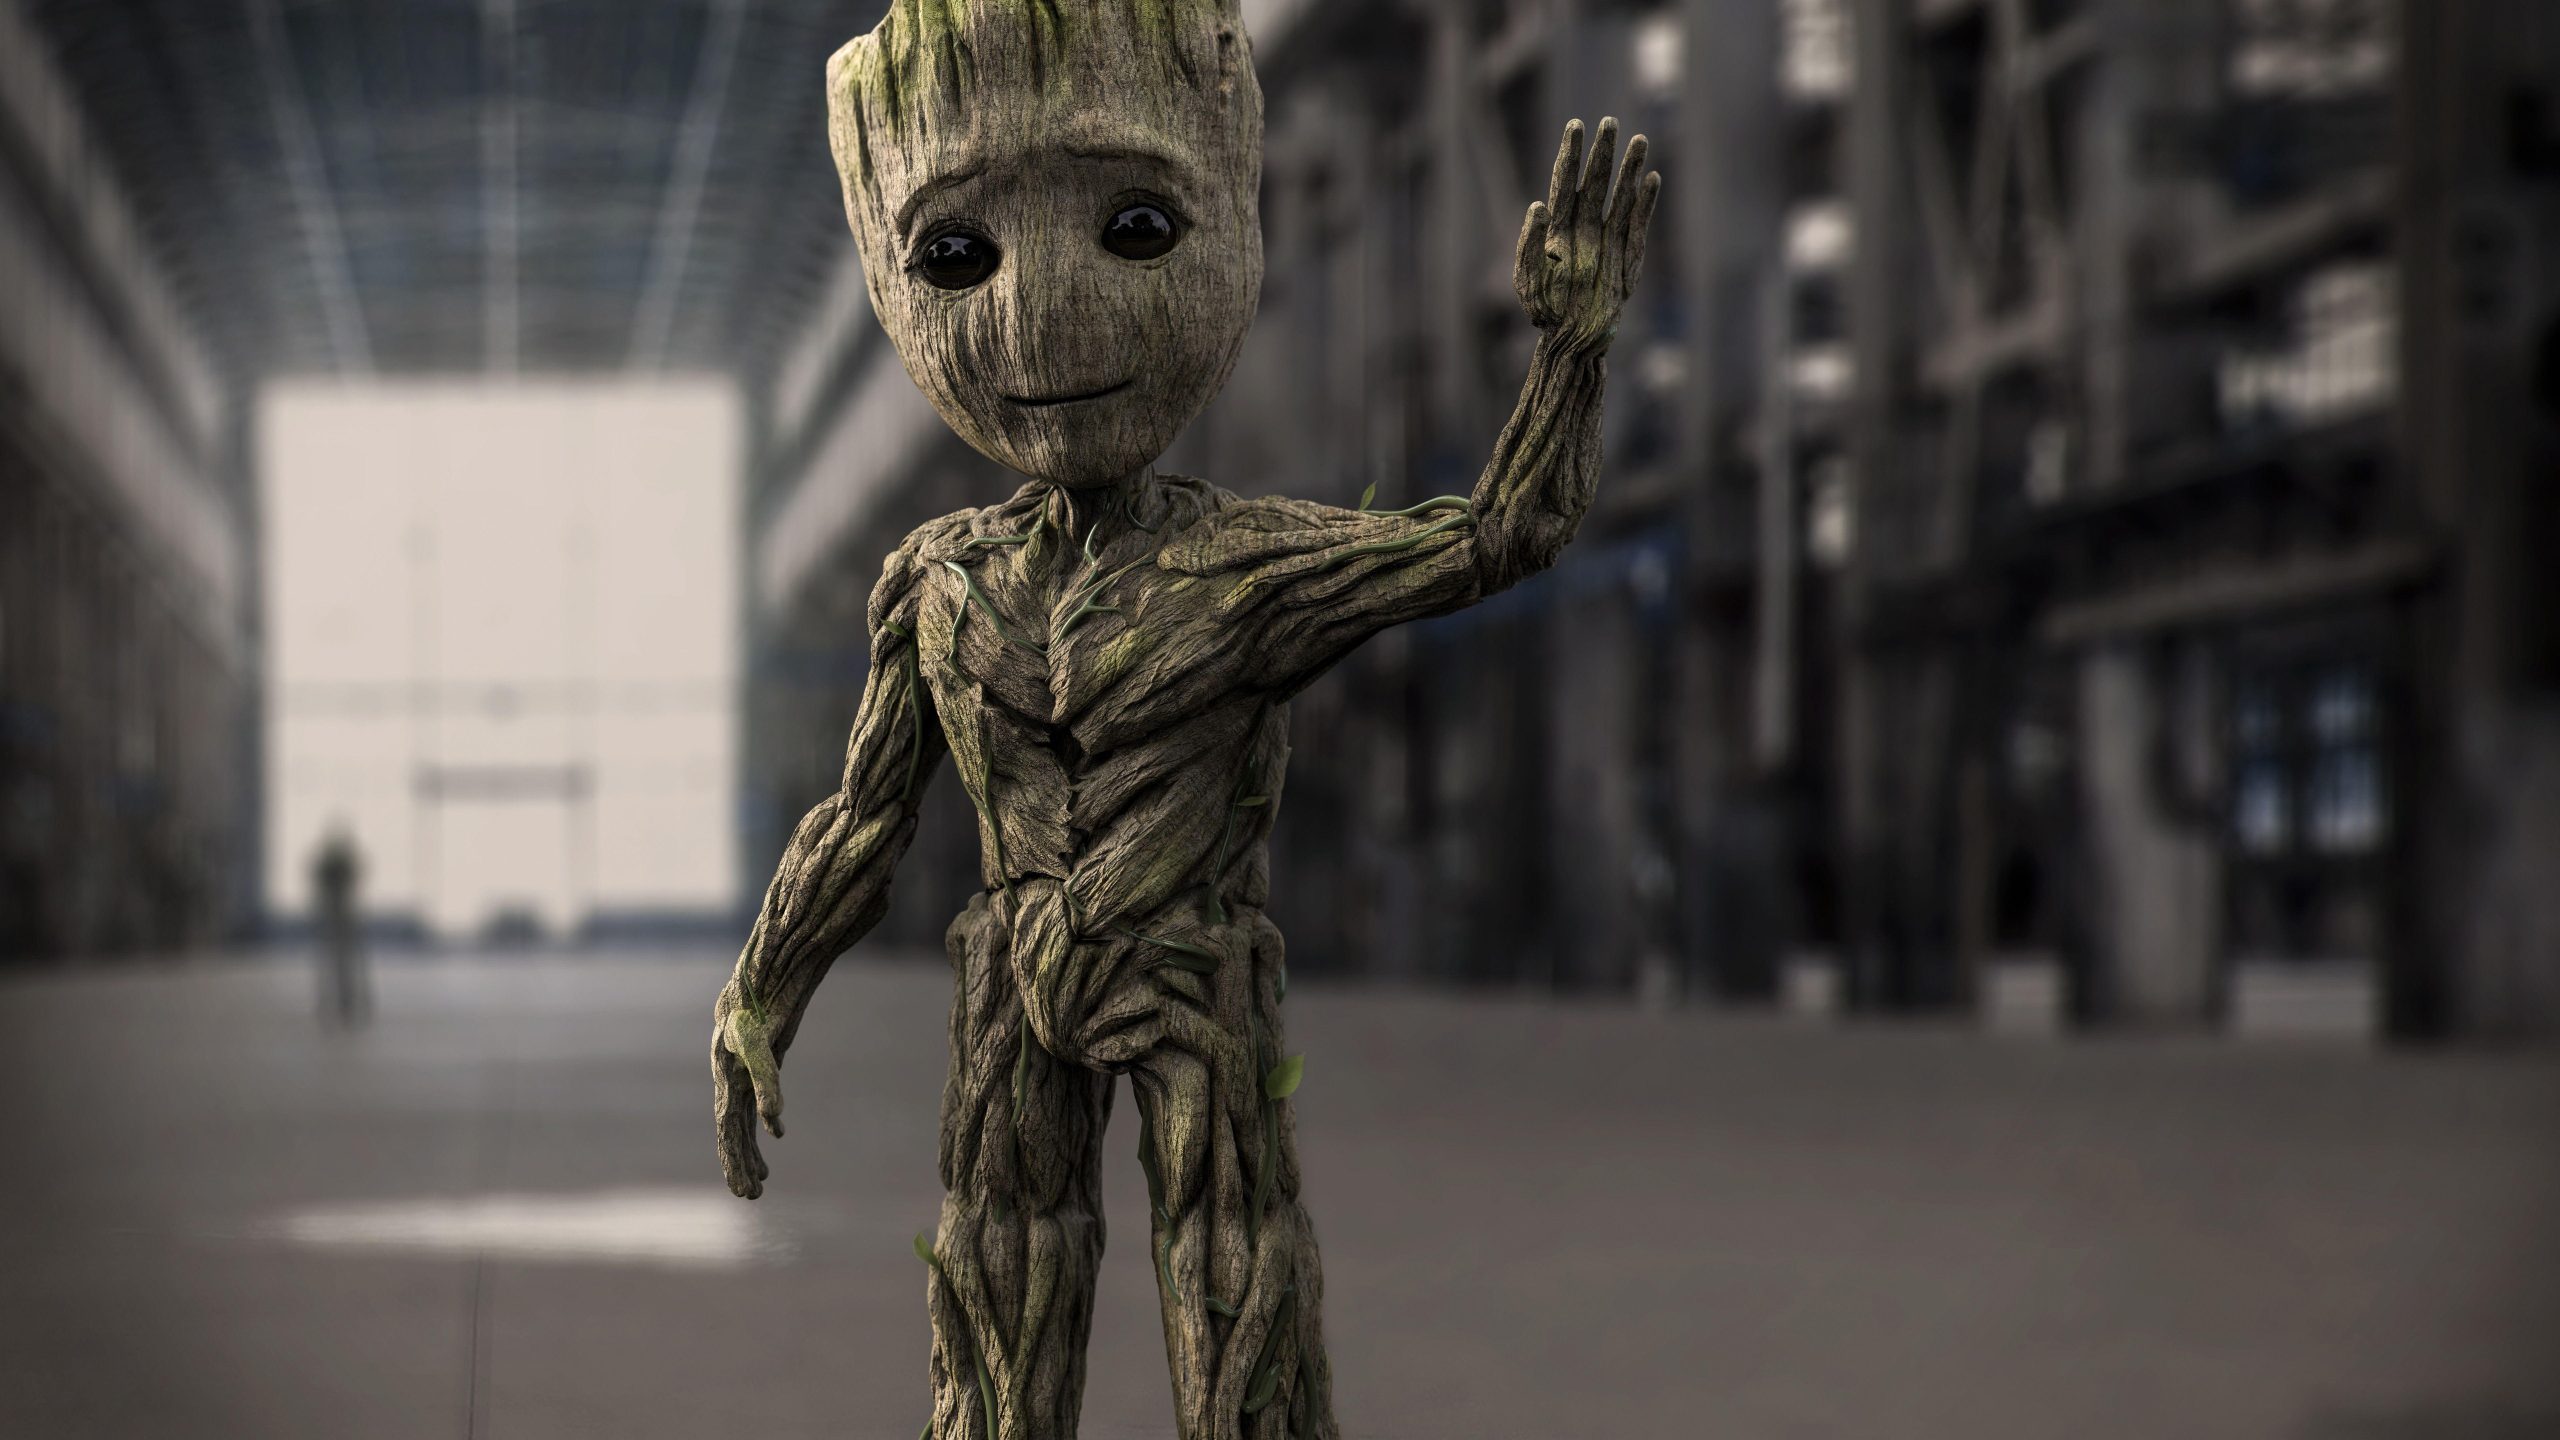 Cute Baby Groot Guardians Of The Galaxy Wallpaper Photo